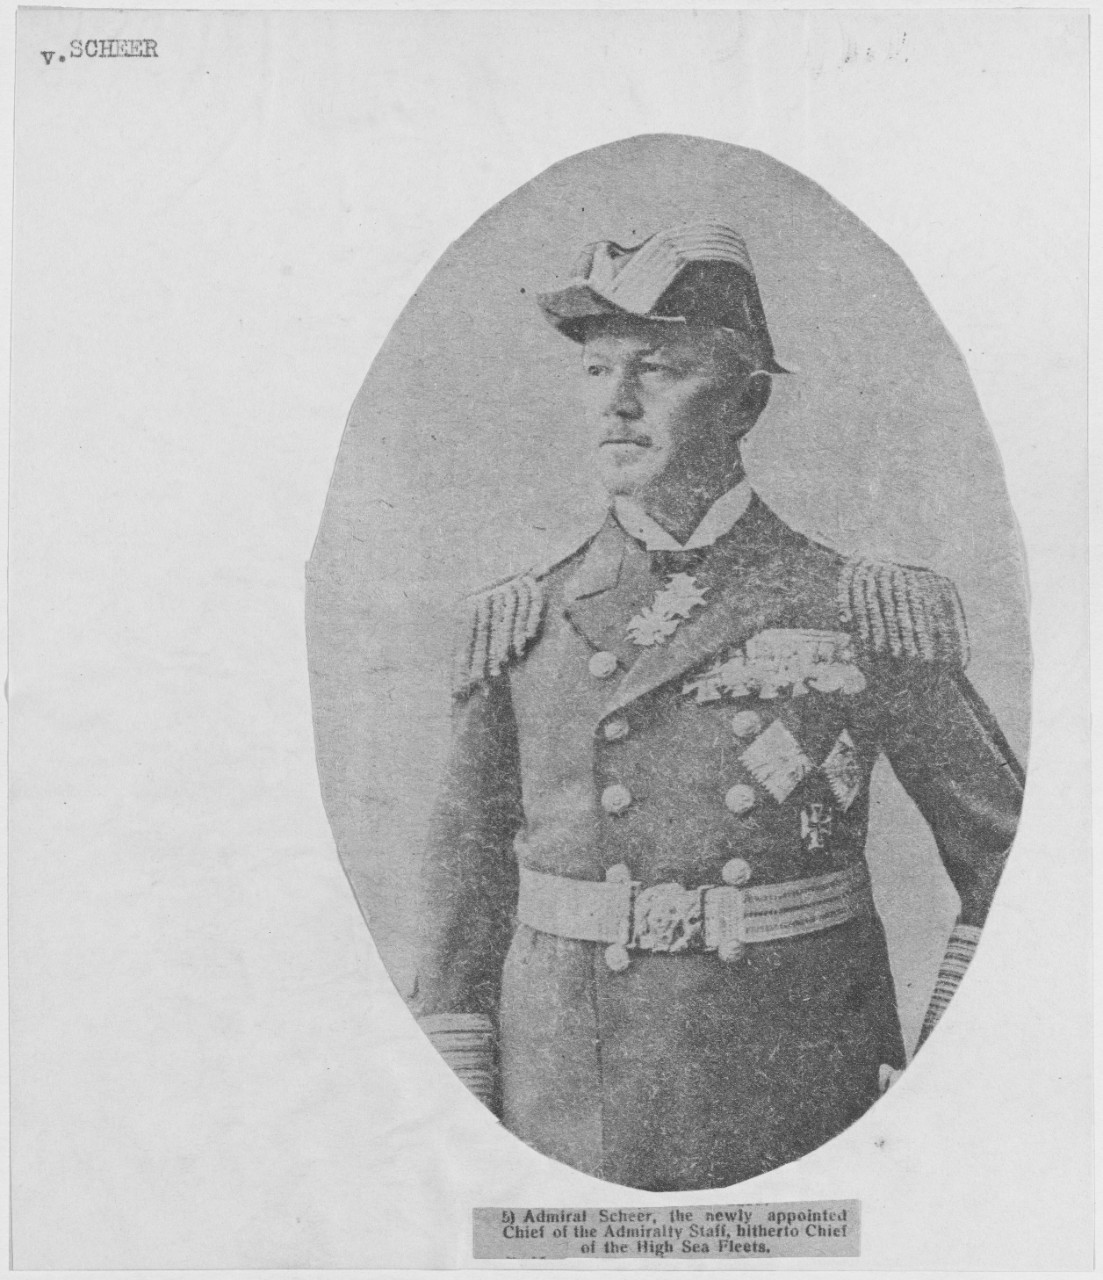 Admiral Scheer, the newly appointed Chief of the Admiralty Staff